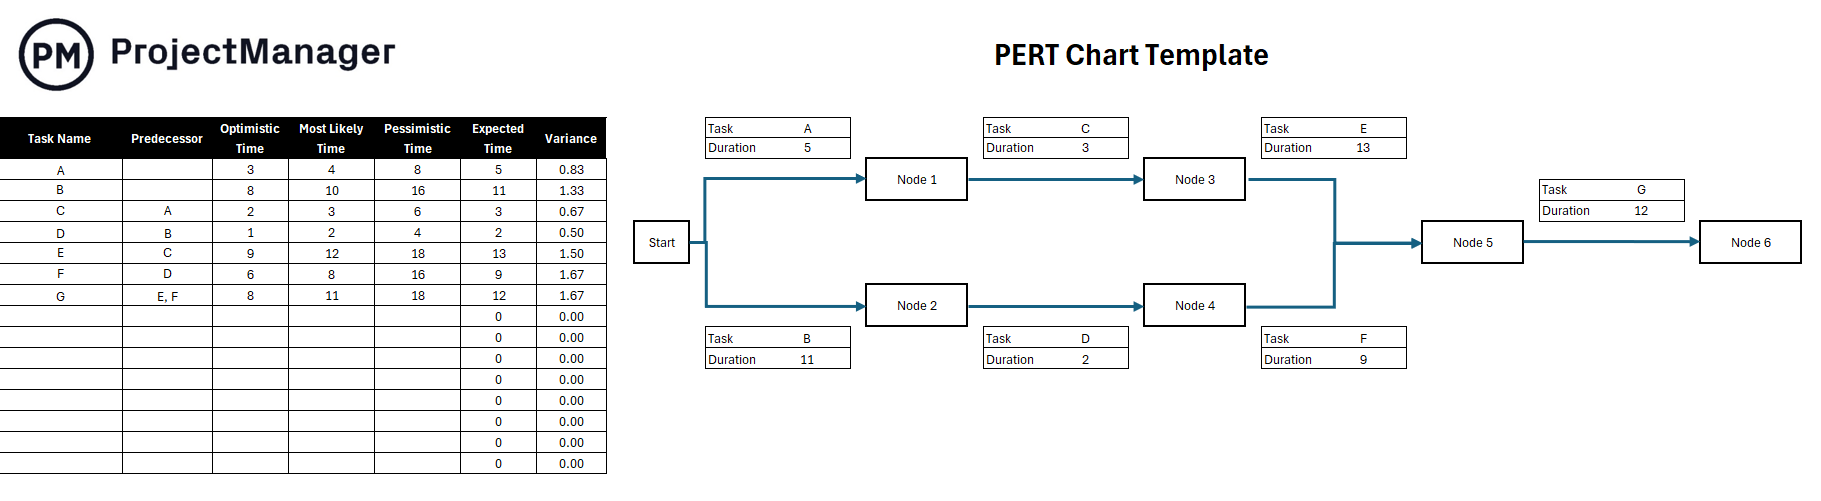 Free PERT chart template for Excel